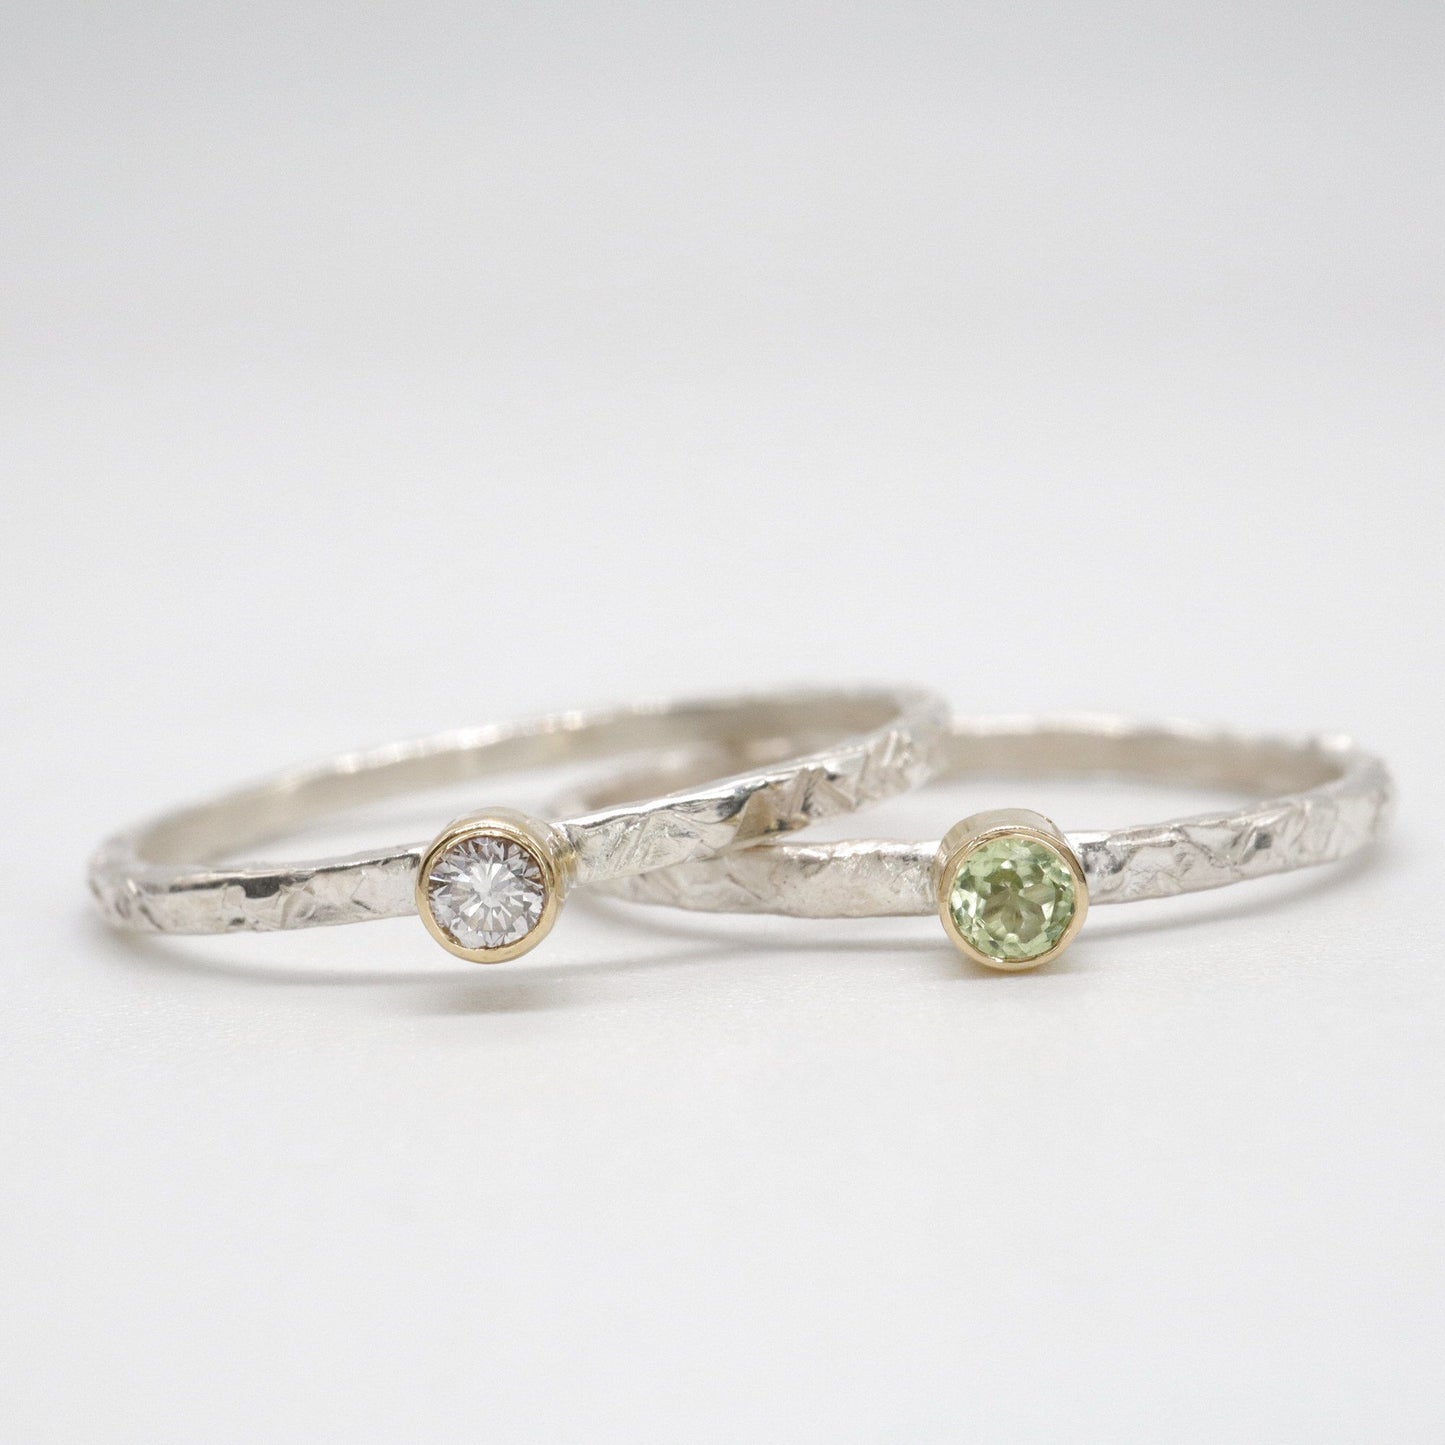 Stacking two ring set with peridot and diamond, Striding Edge design in 18ct yellow gold and silver.